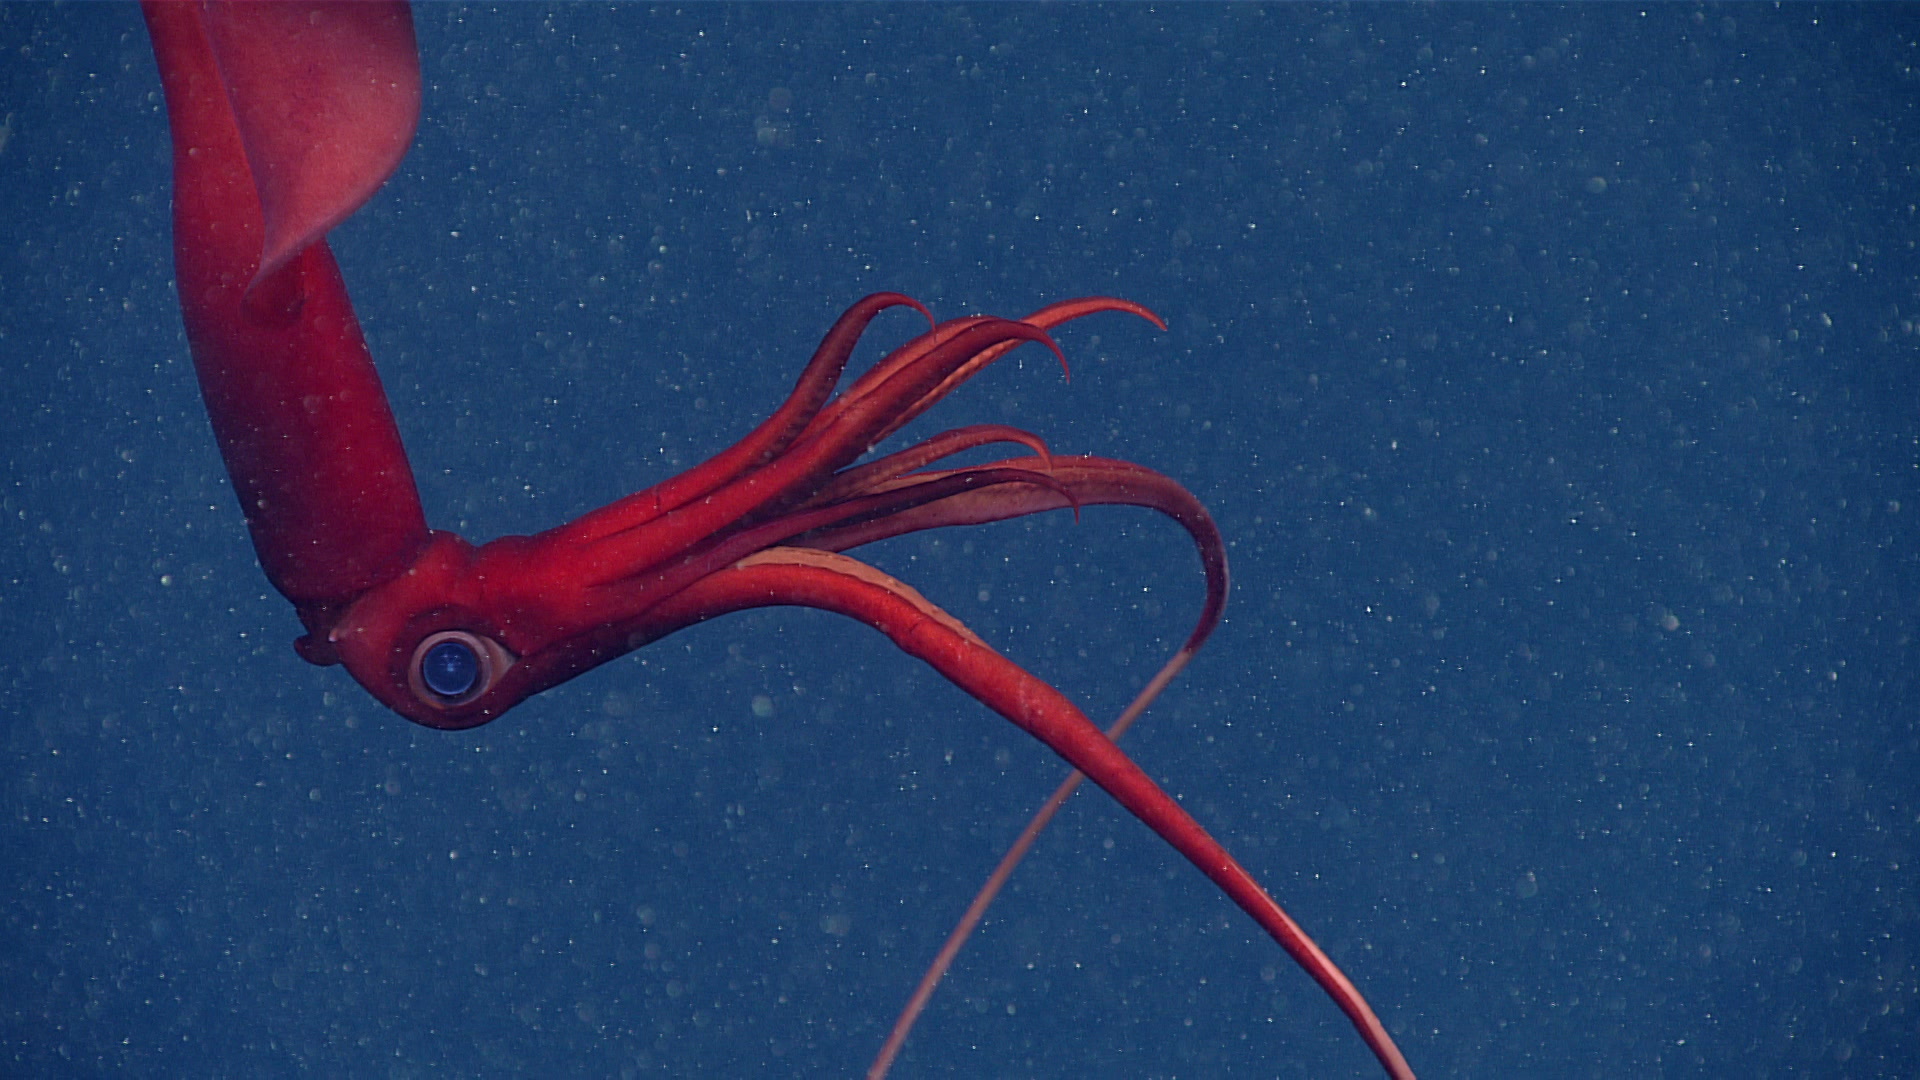 This magnificent, magical, and marvelous Magnoteuthis magna, a species of whiplash squid and the most common deep-ocean squid, was seen while exploring Kinlan Canyon off the coast of Rhode Island.